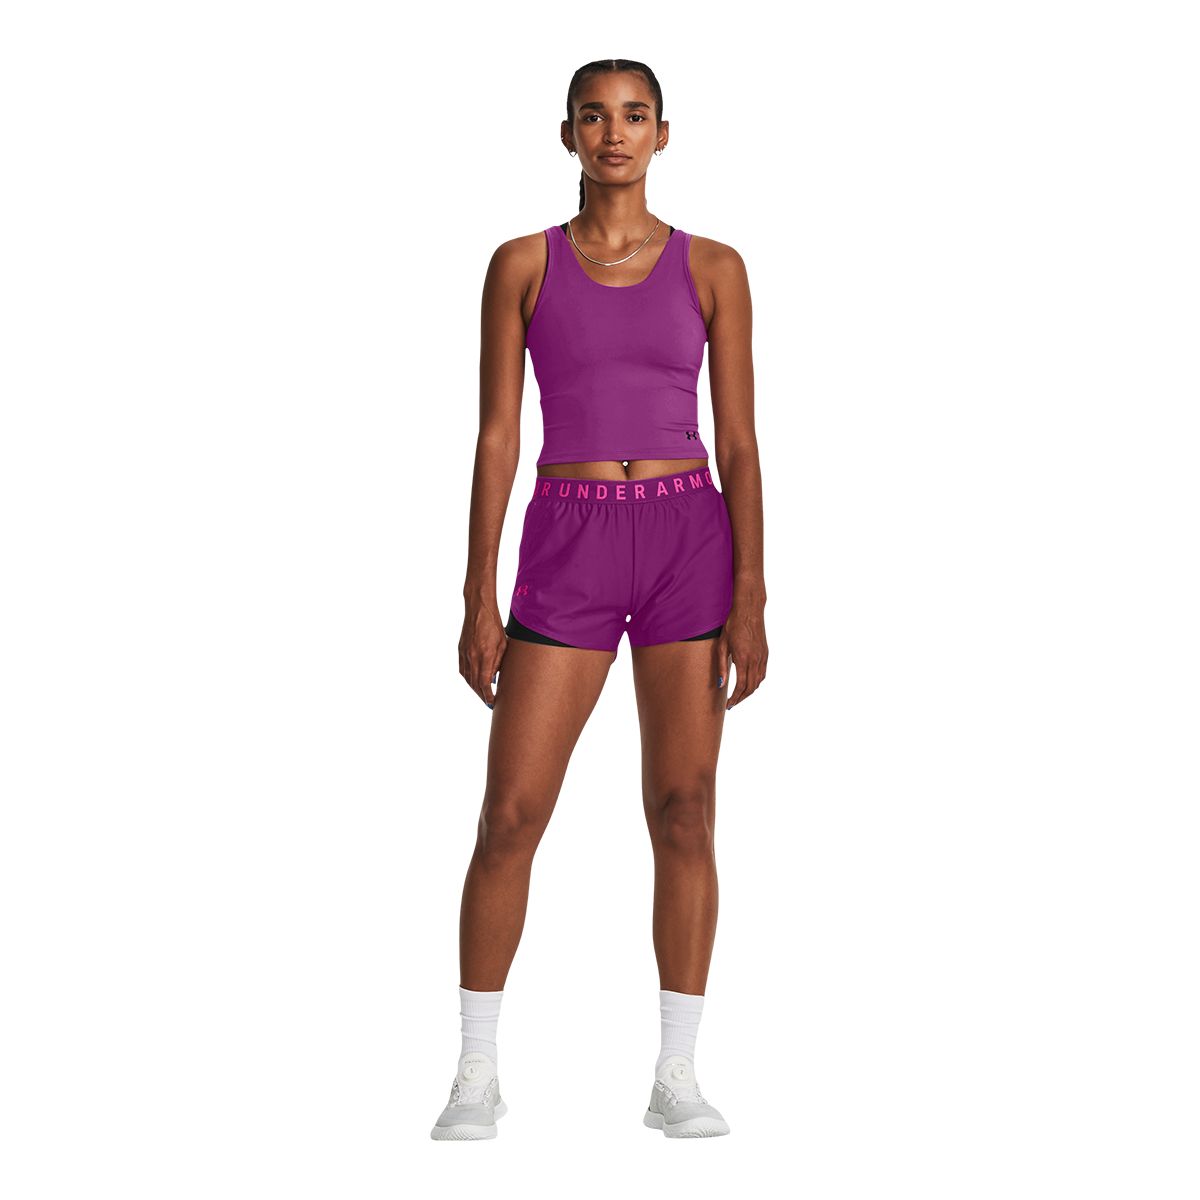 Under armour, Shorts, Womens sports clothing, Sports & leisure